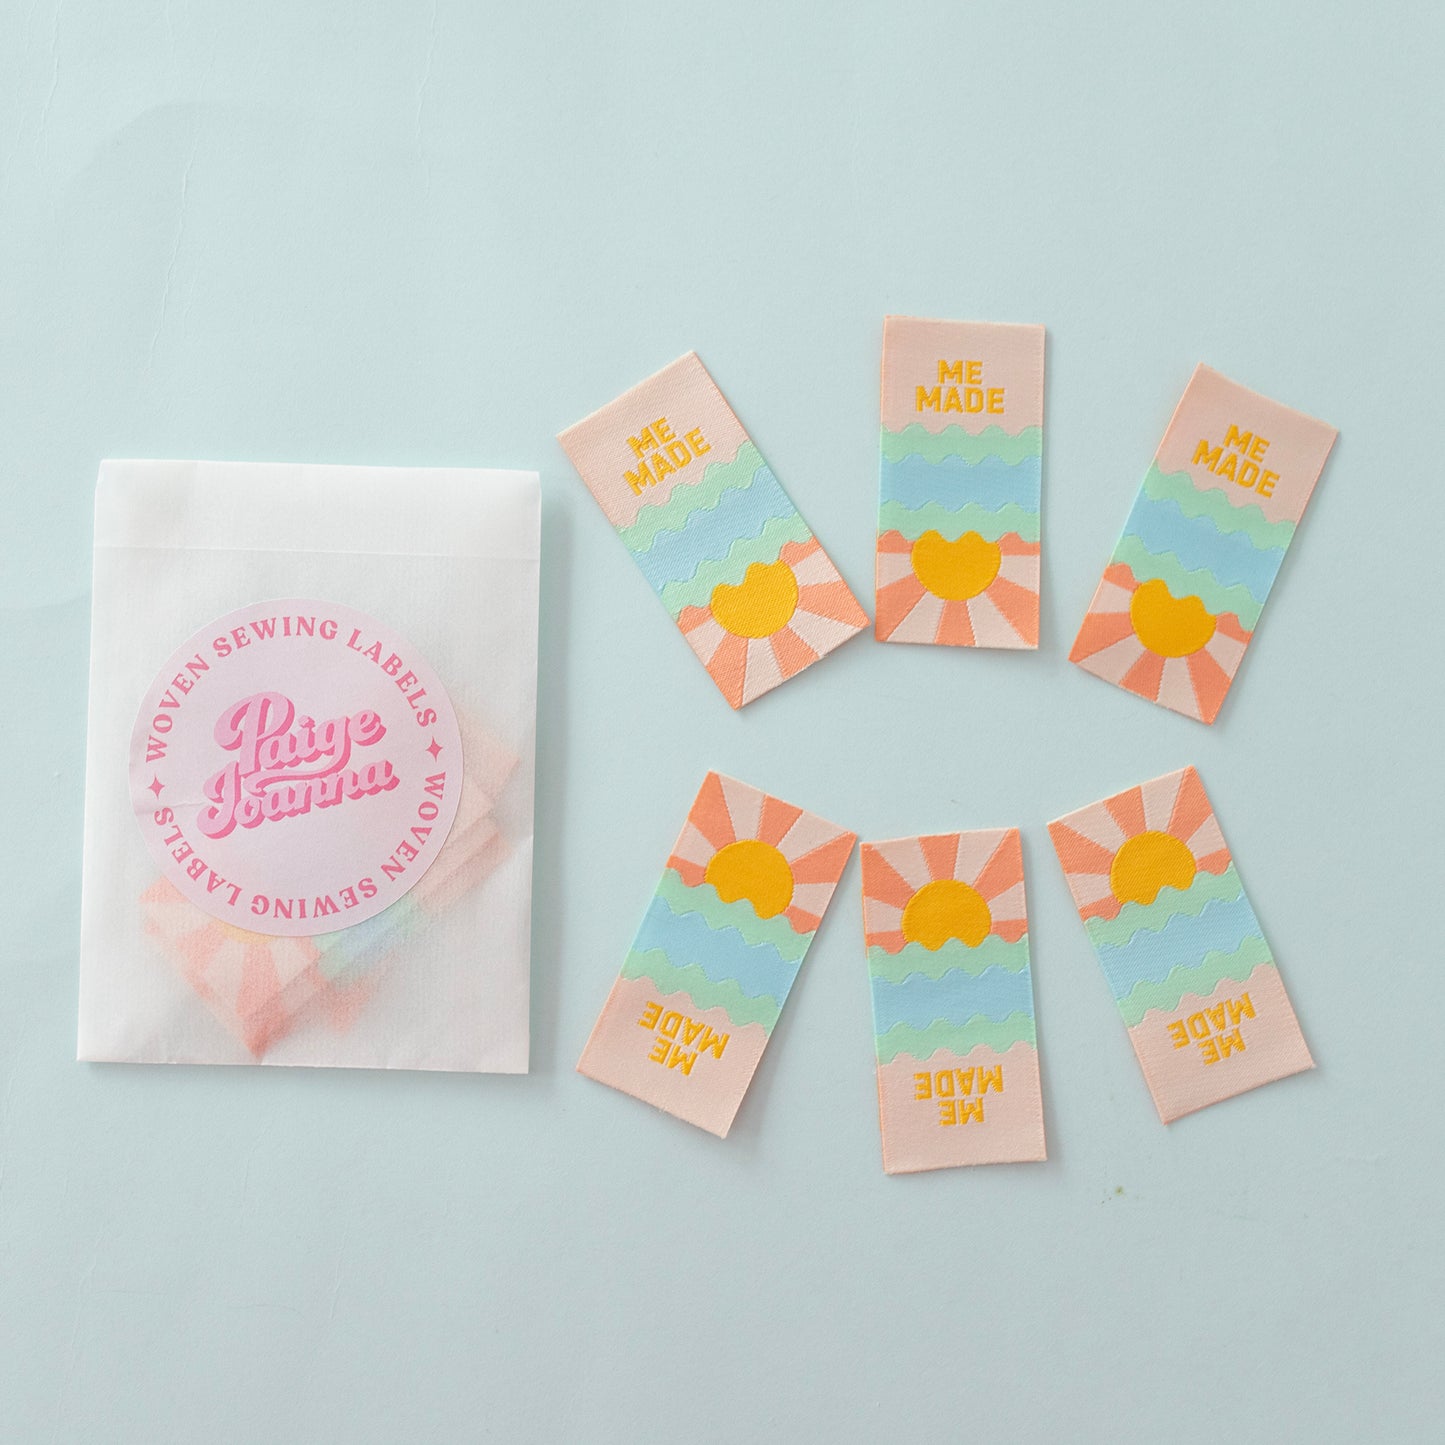 X6 Original Paige Joanna Woven Clothing Labels | Me Made Sun Rays Design